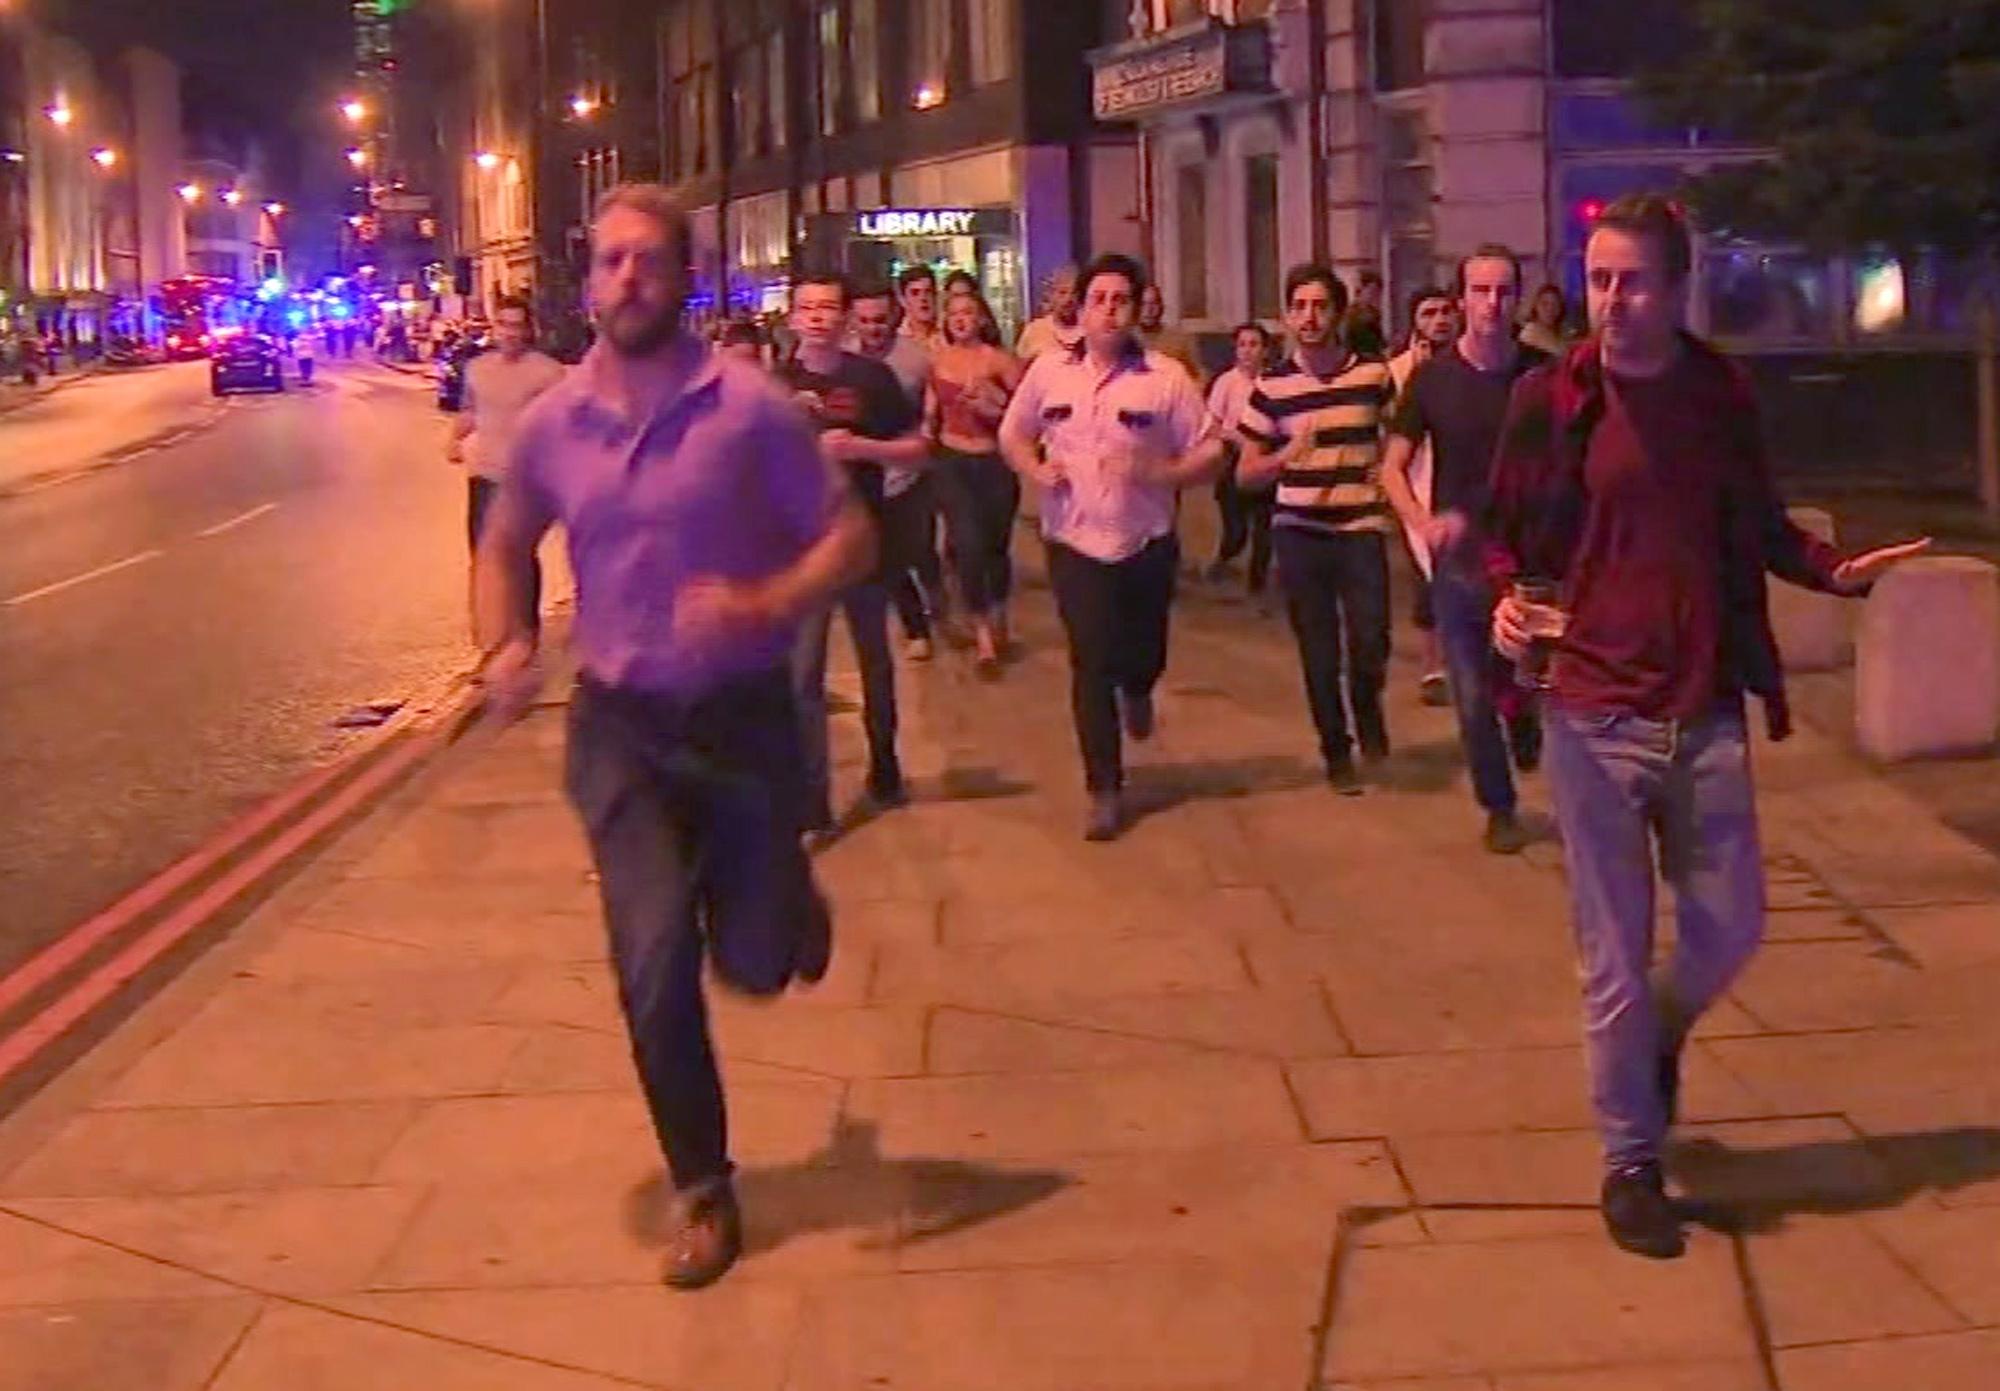 Even as Londoners fled the attacks, it was possible to detect the emerging spirit of defiance: this man wasn't going to let the terrorists spill his pint